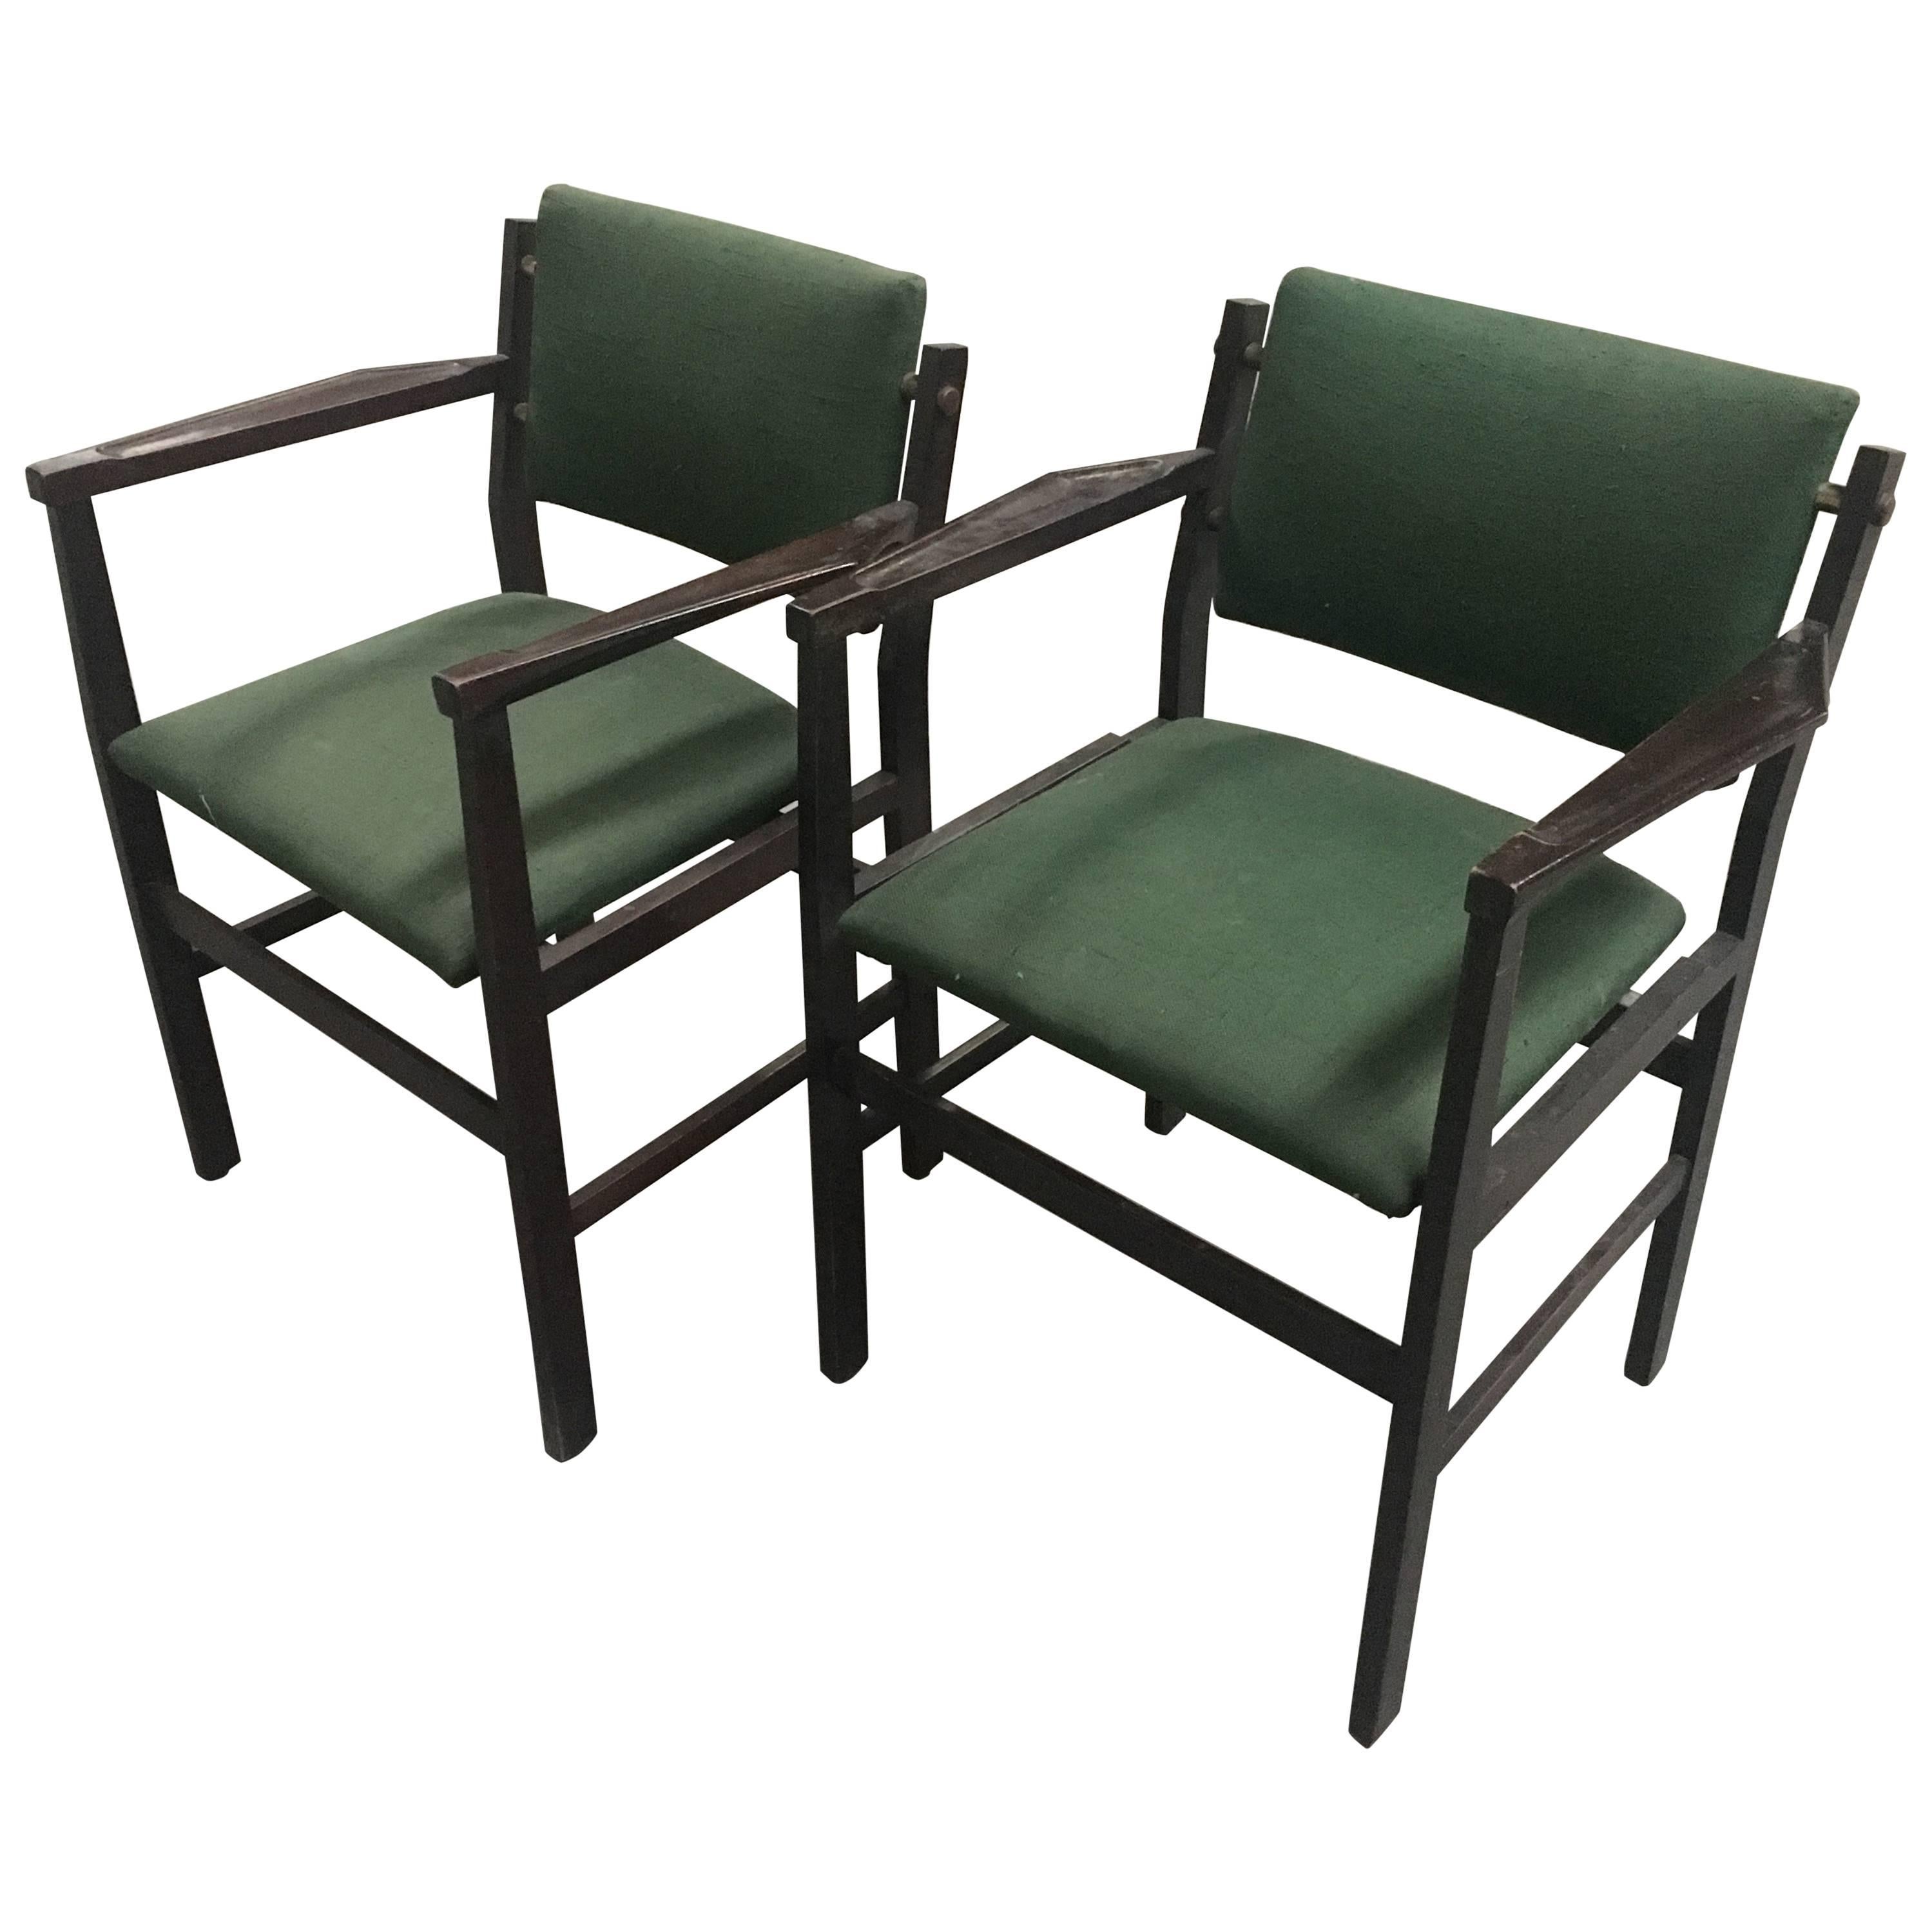 Pair of Italian Chairs with Original Green Fabric from 1960s